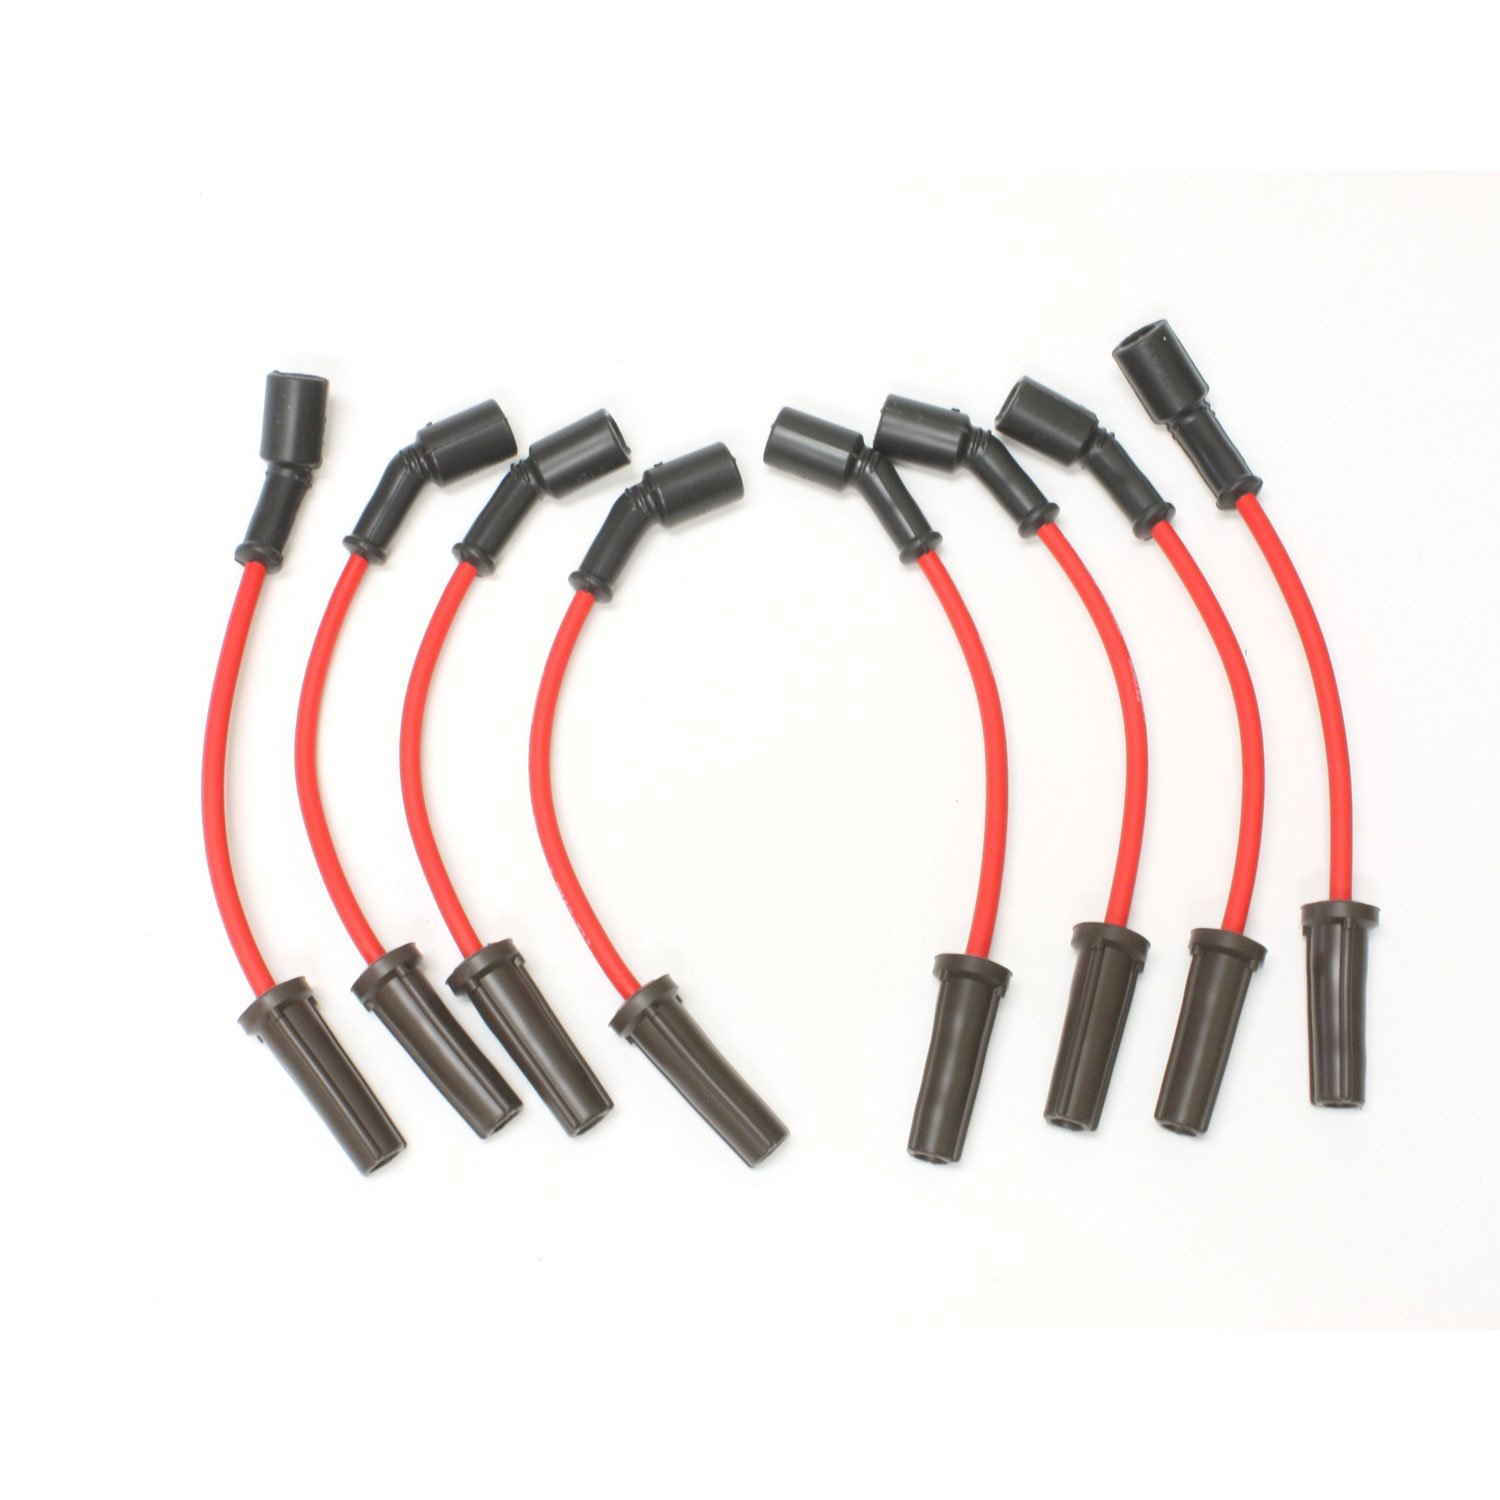 PerTronix 808423 Flame-Thrower Spark Plug Wires 8 cyl GM Custom Fit Red